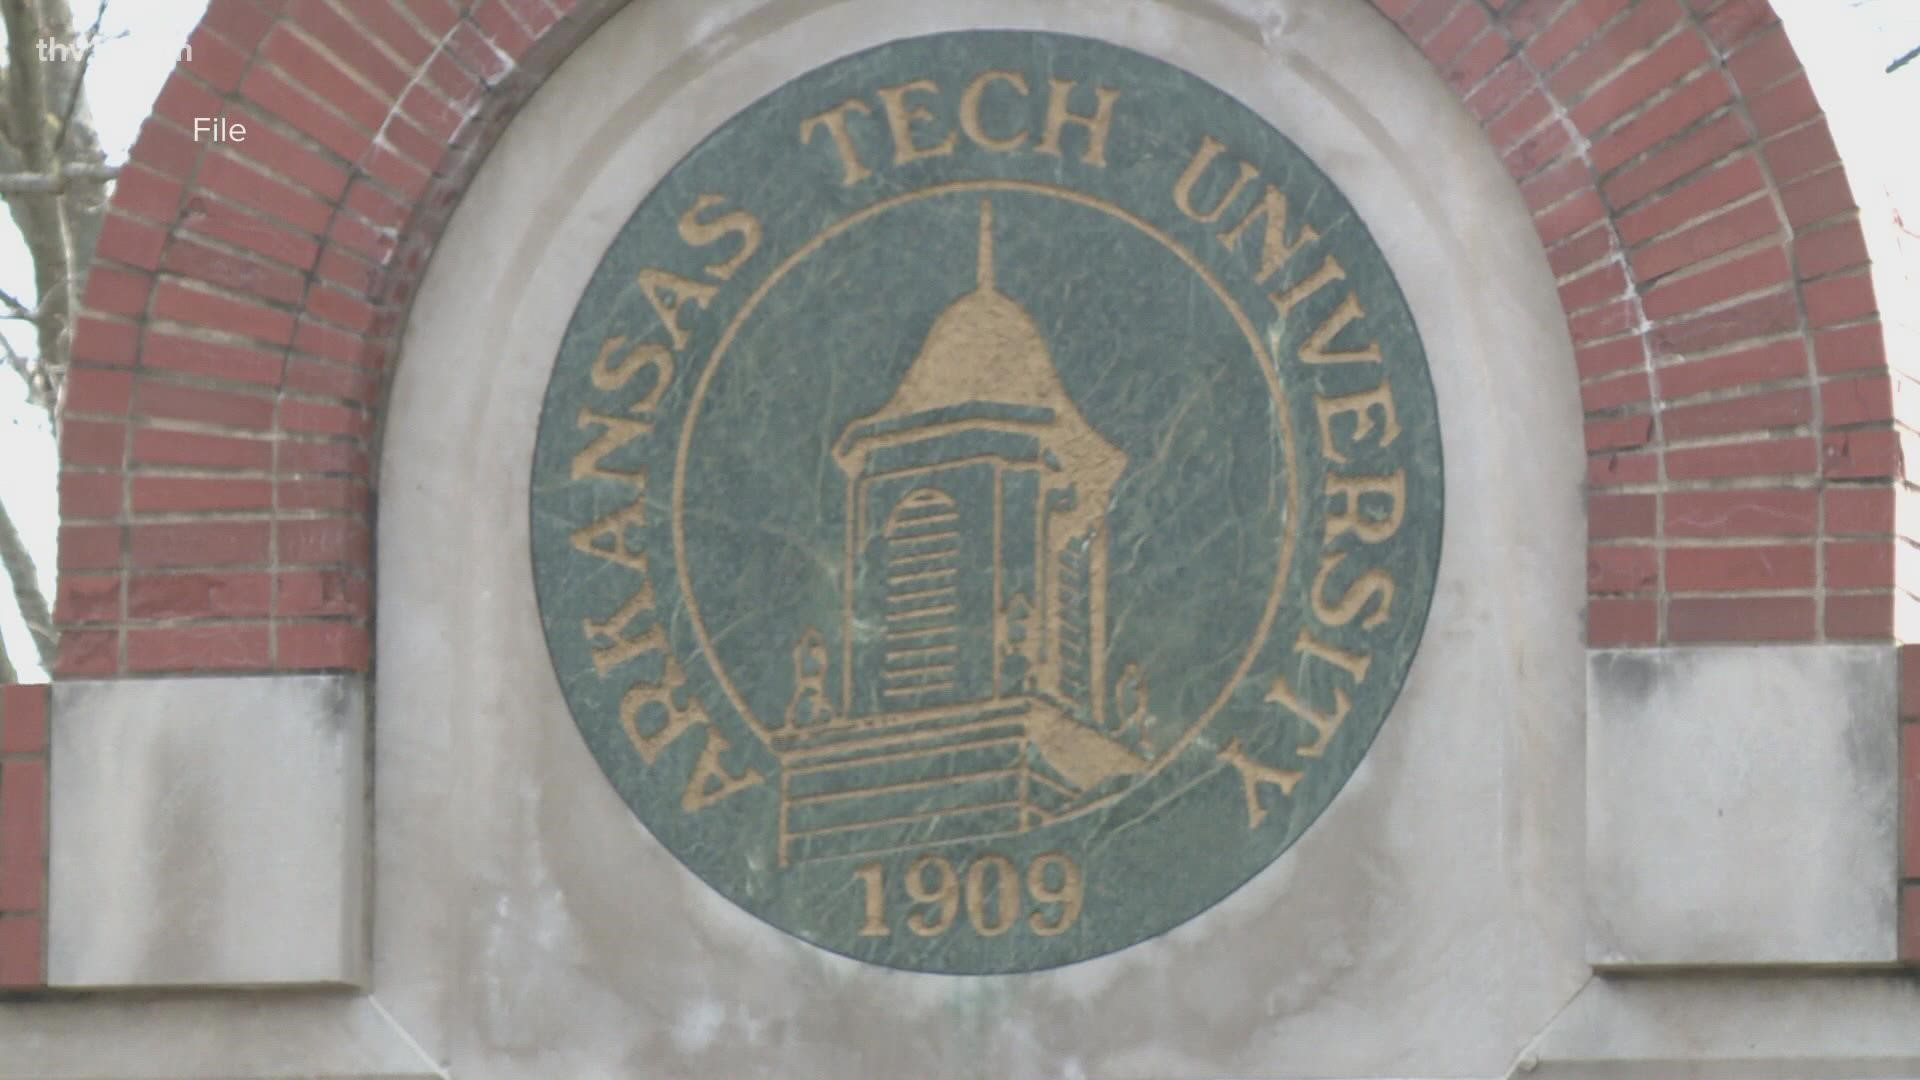 Lance Turner provides the top business stories for September 28, 2022 including Arkansas Tech being named as the #1 regional public university in the state.